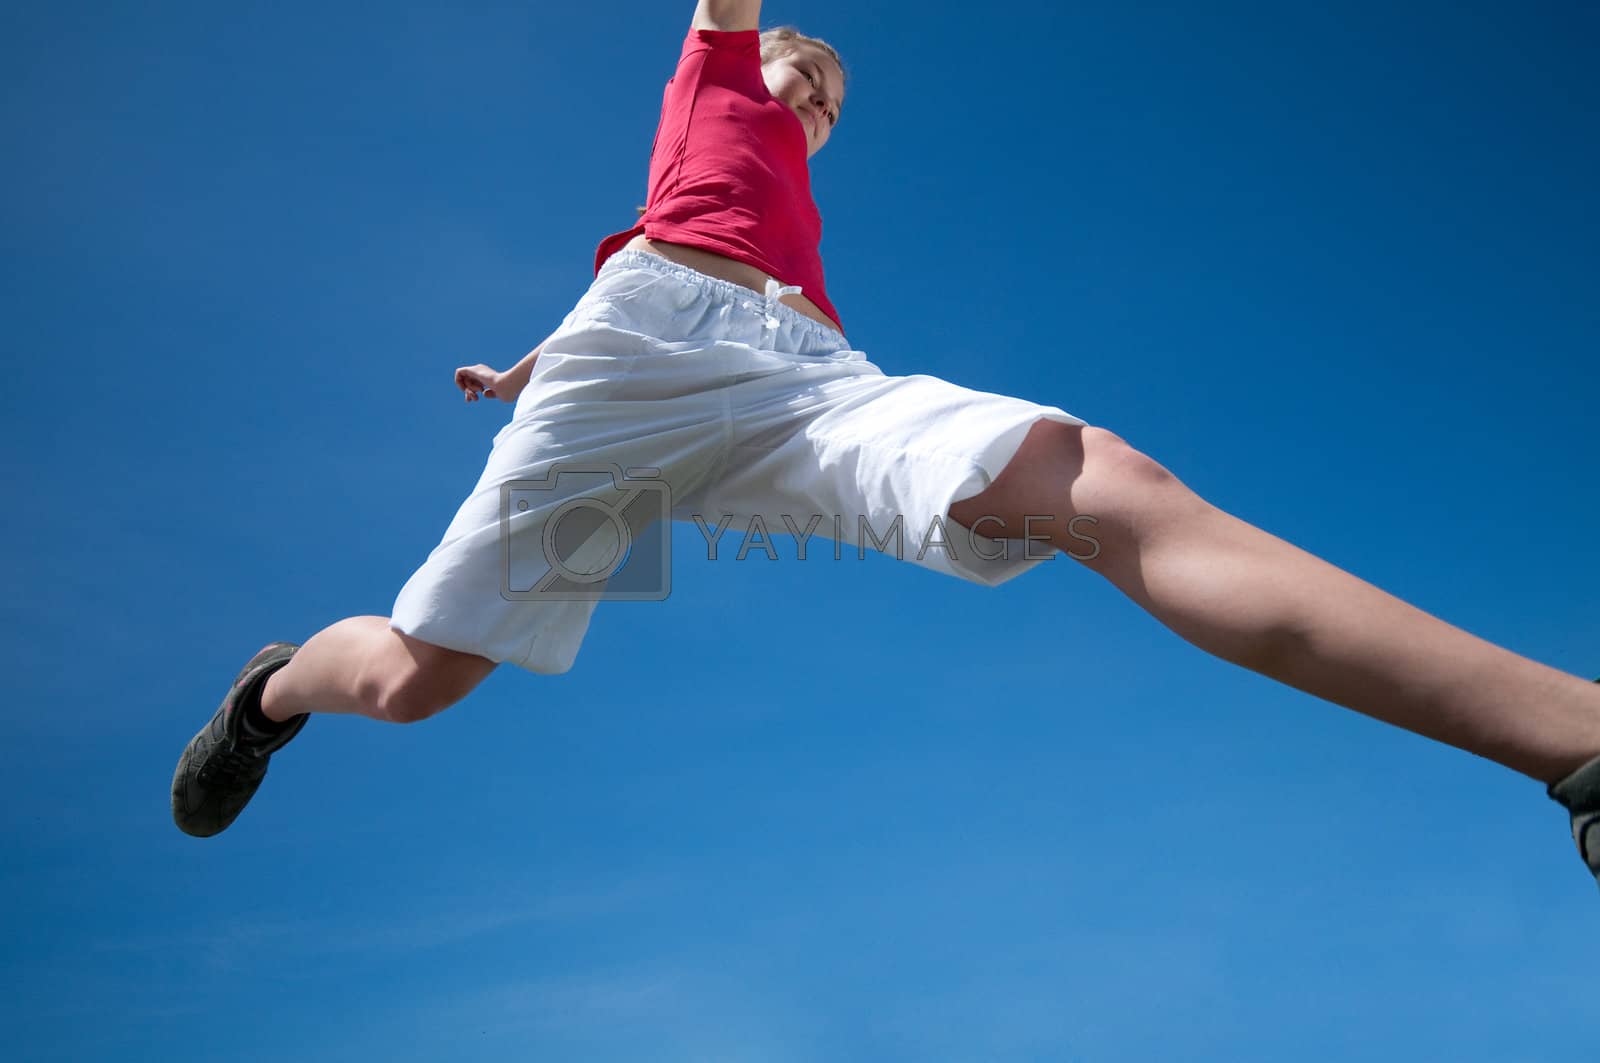 Royalty free image of Beautiful woman jump into sky by markin